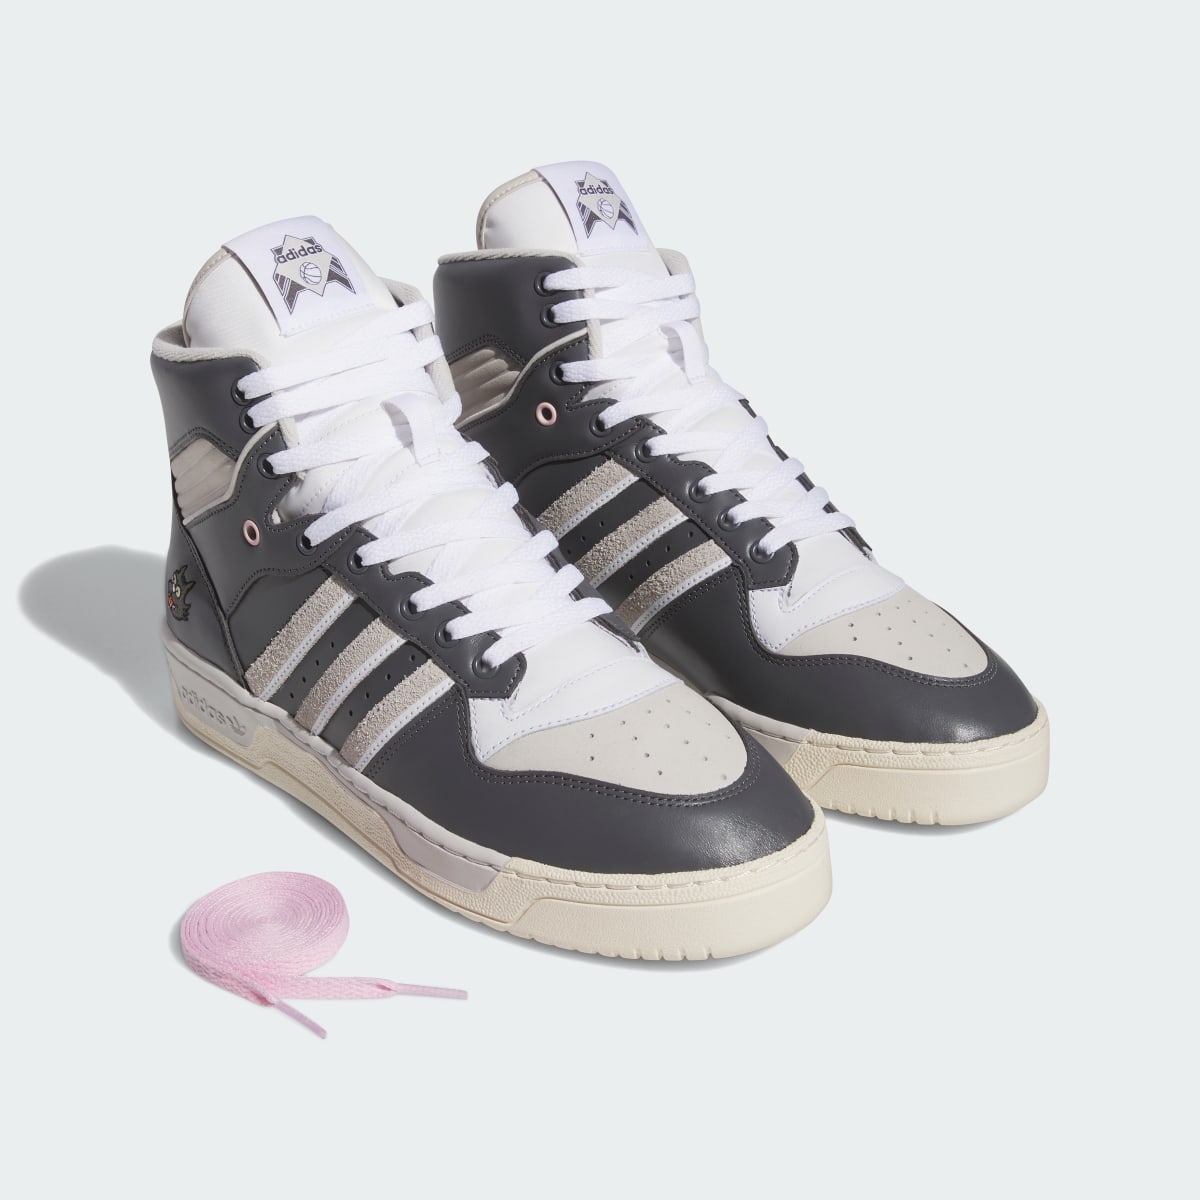 Adidas Rivalry High Scratchy. 12